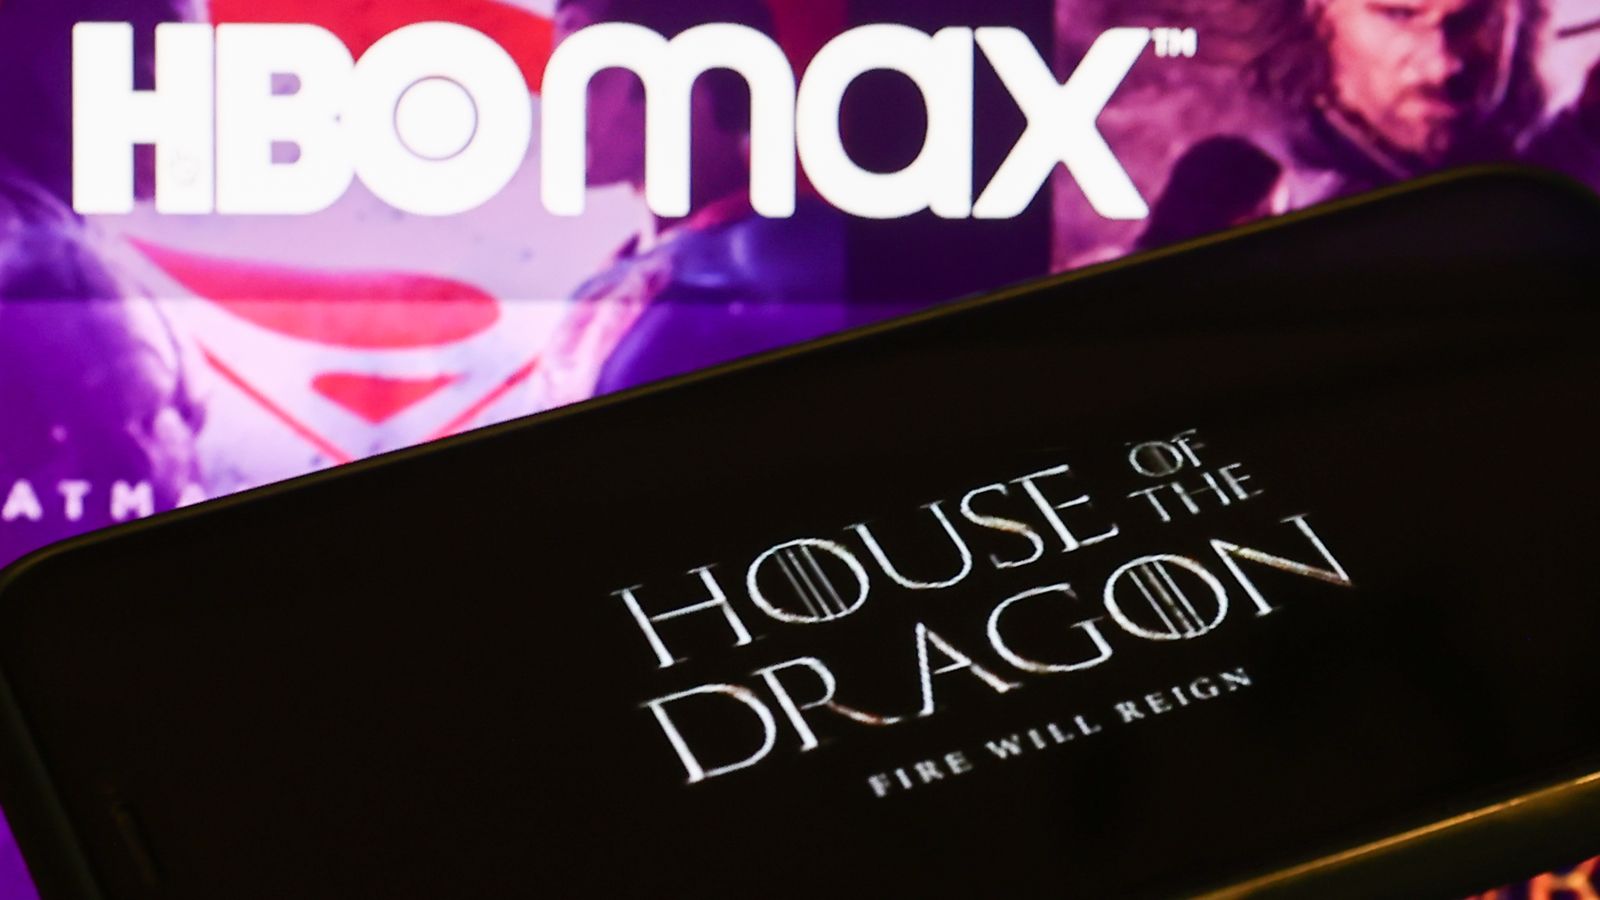 HBO - The death of romance. #GameofThrones, #Succession, and  #HouseoftheDragon are streaming on HBO Max.